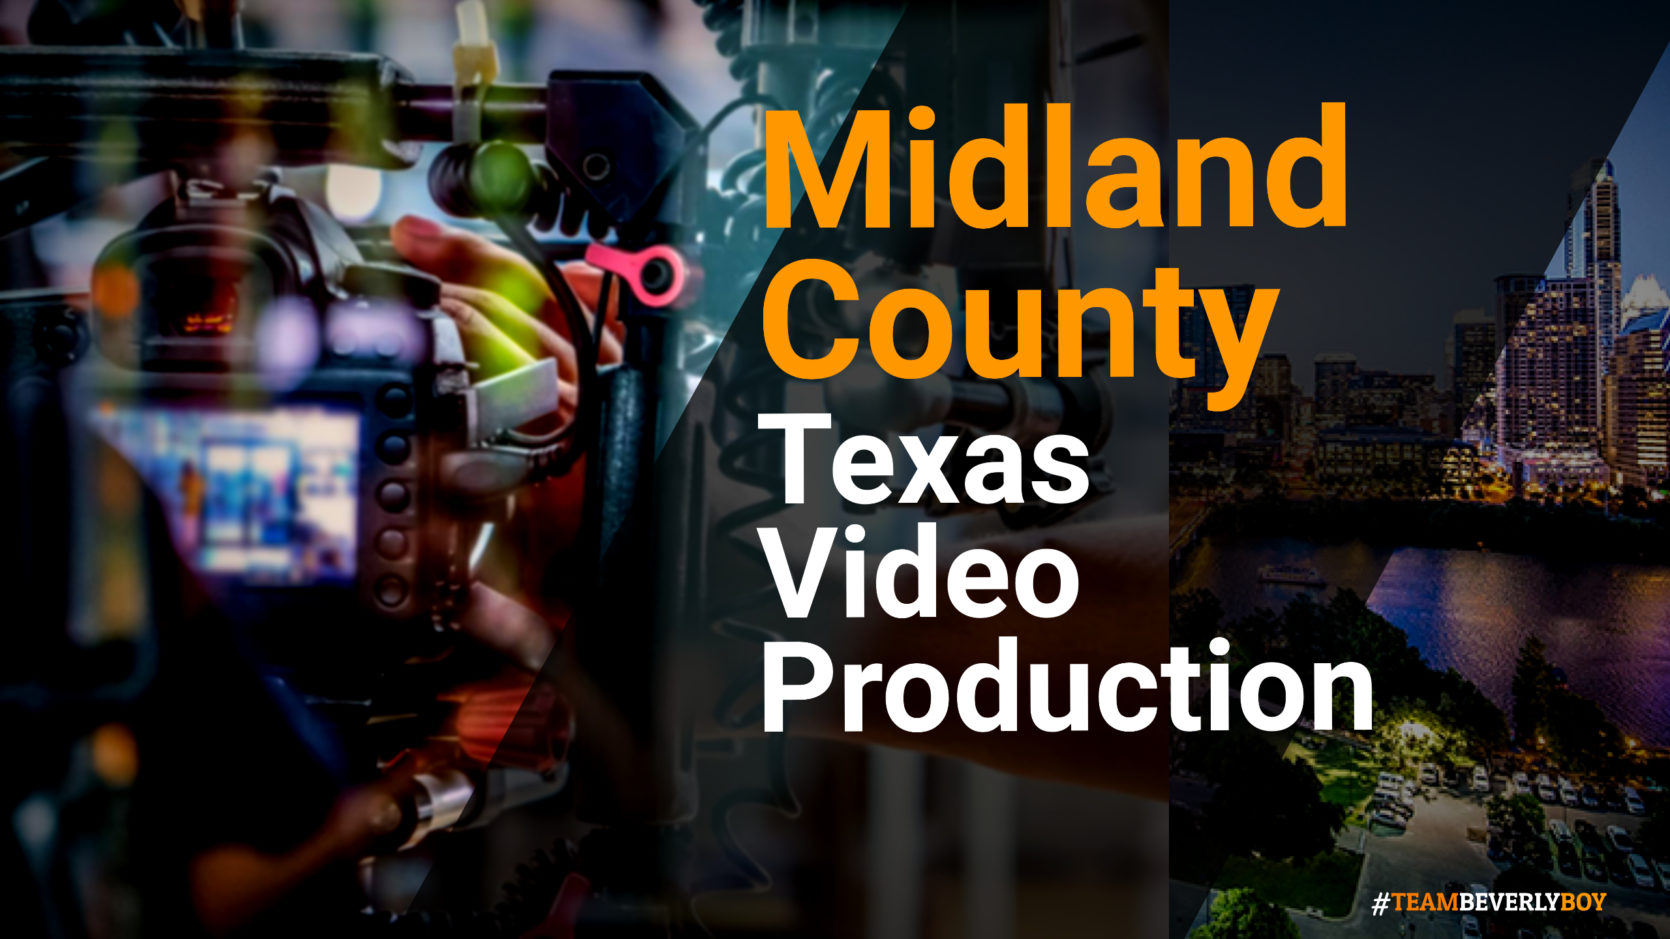 Midland County TX Video Production